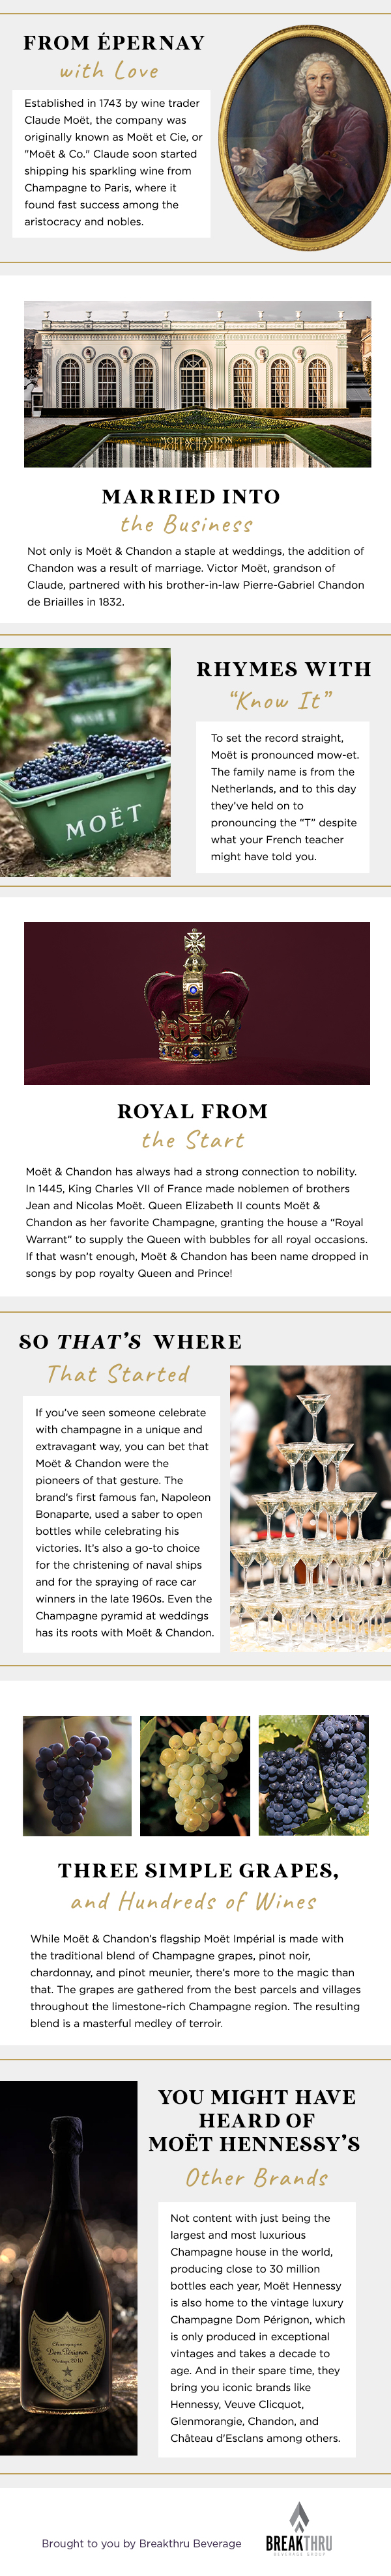 So, you think you know Moet & Chandon?